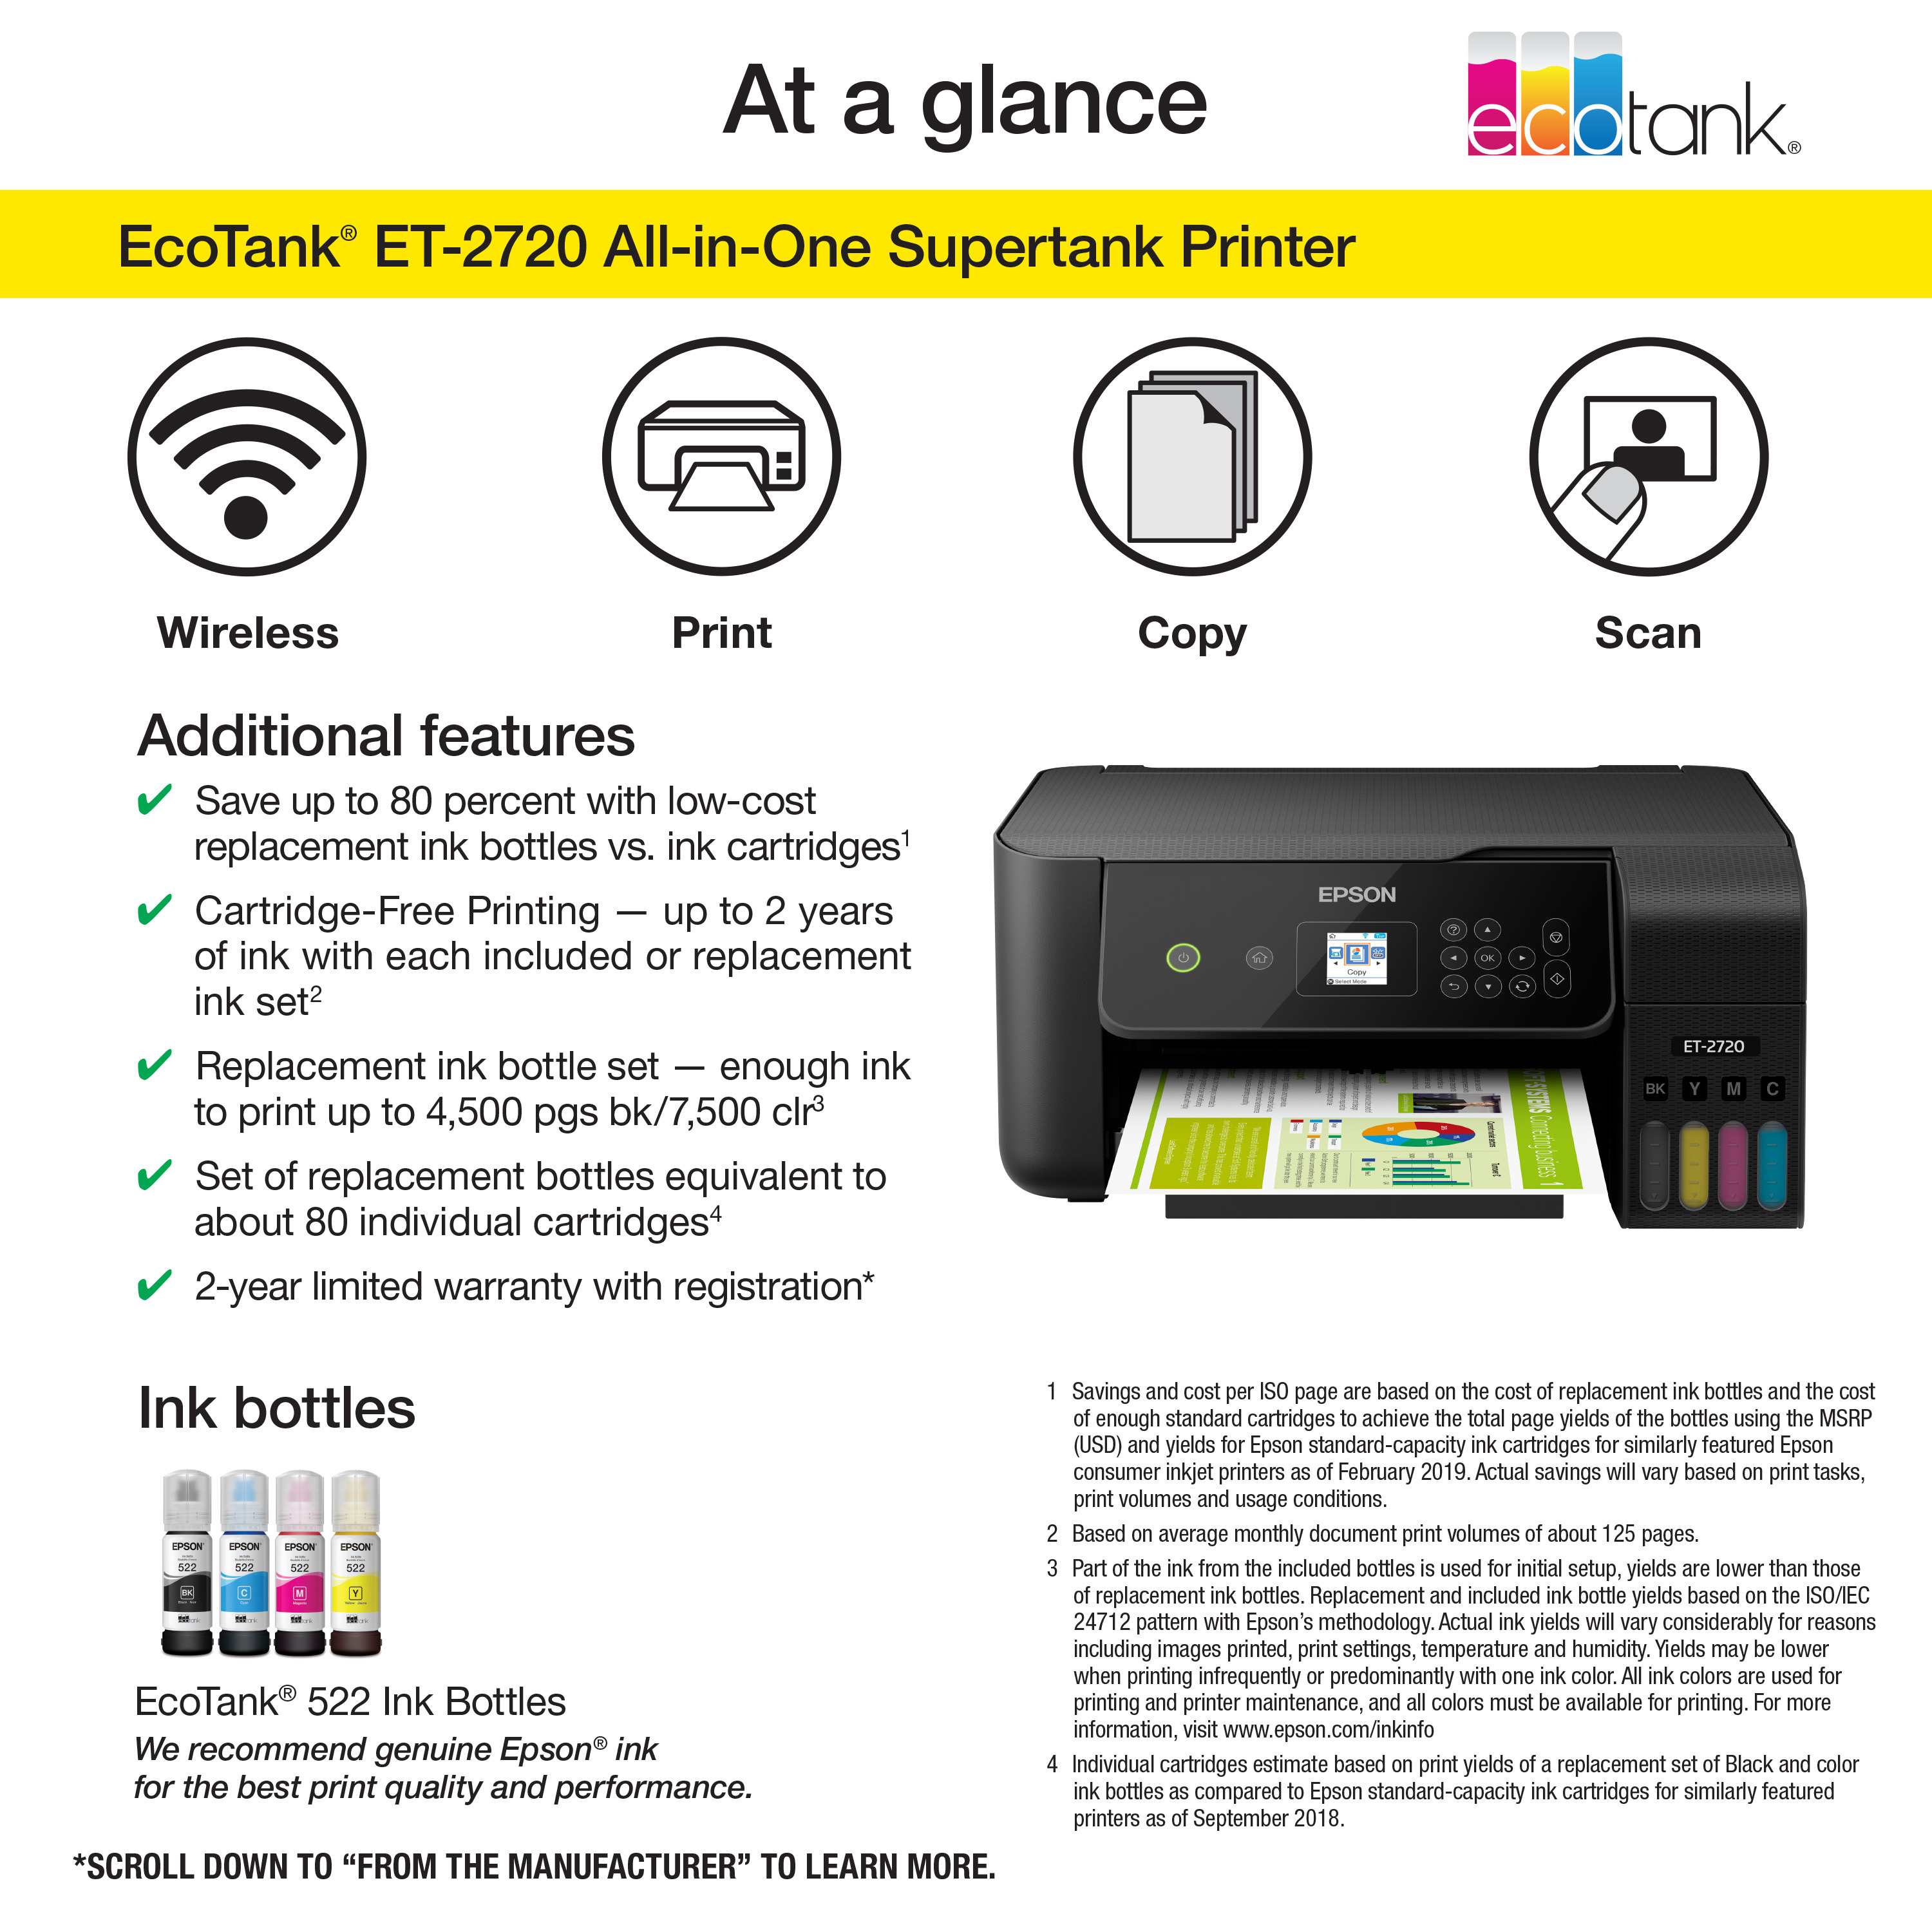 Epson EcoTank ET-2720 Wireless All-in-One Color Supertank Printer - Black - image 2 of 7